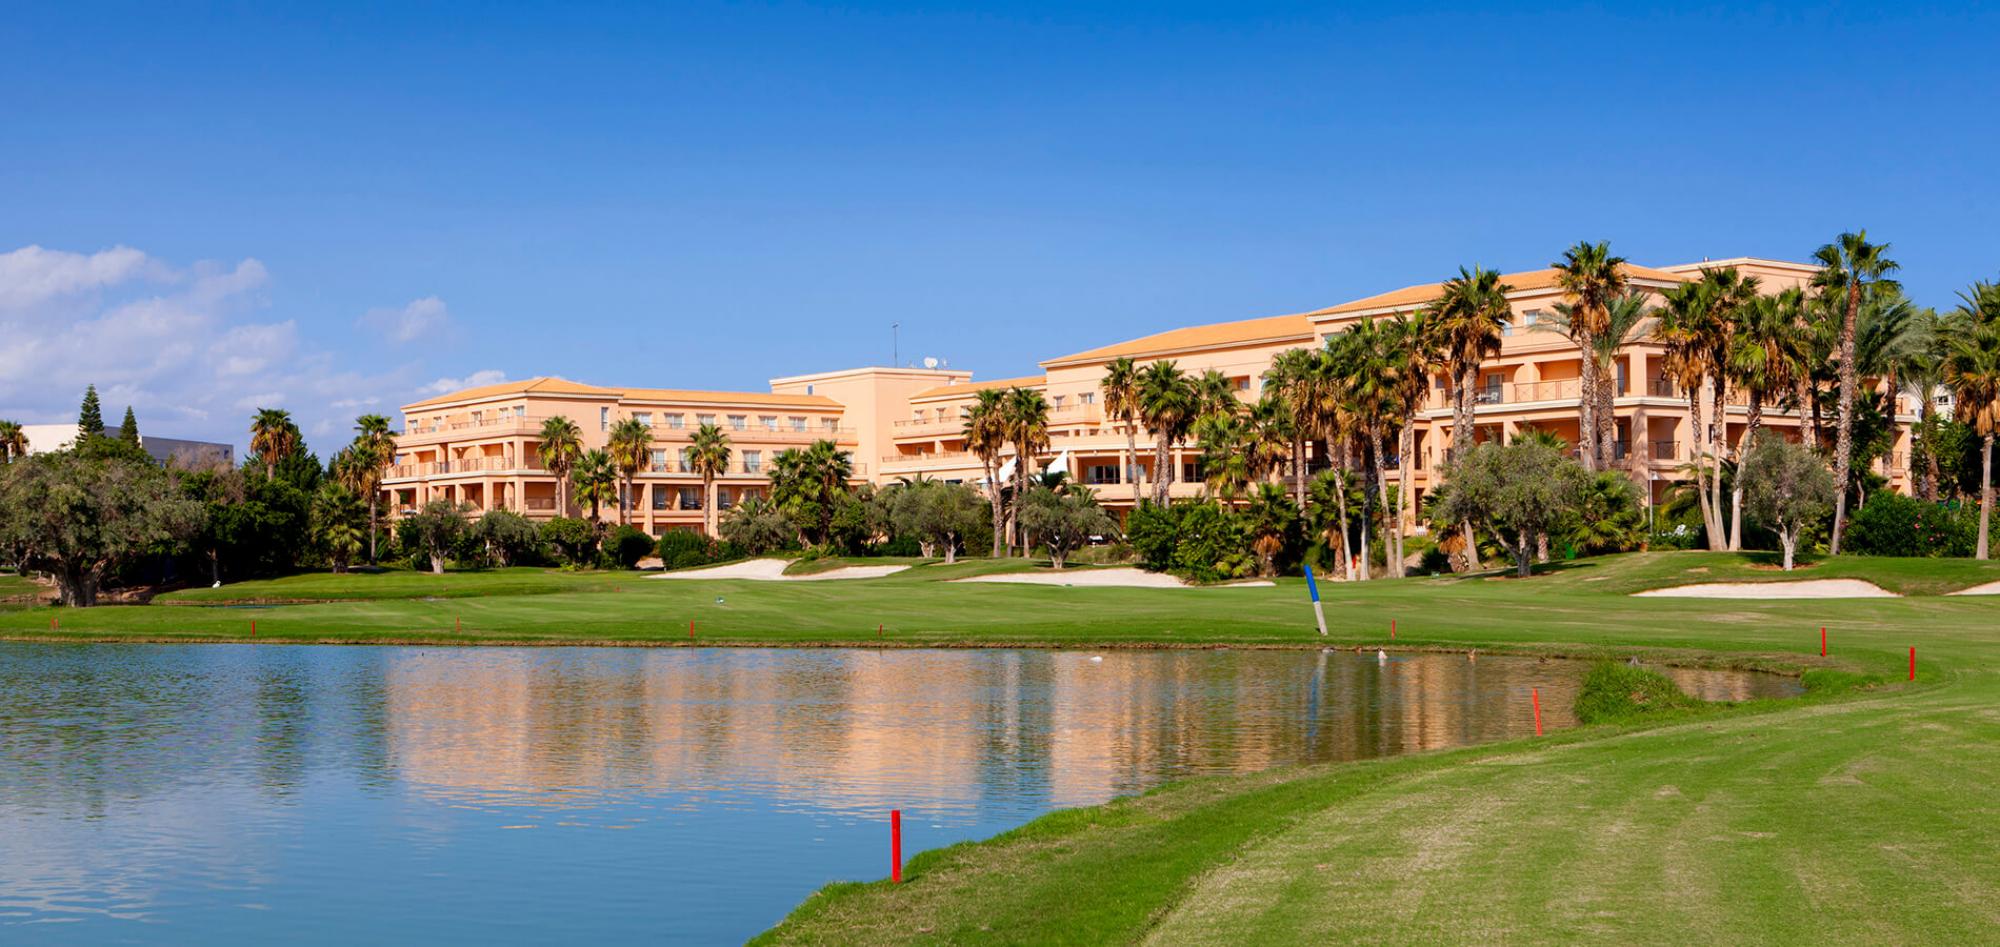 View Husa Alicante Golf Hotel's lovely hotel within magnificent Costa Blanca.